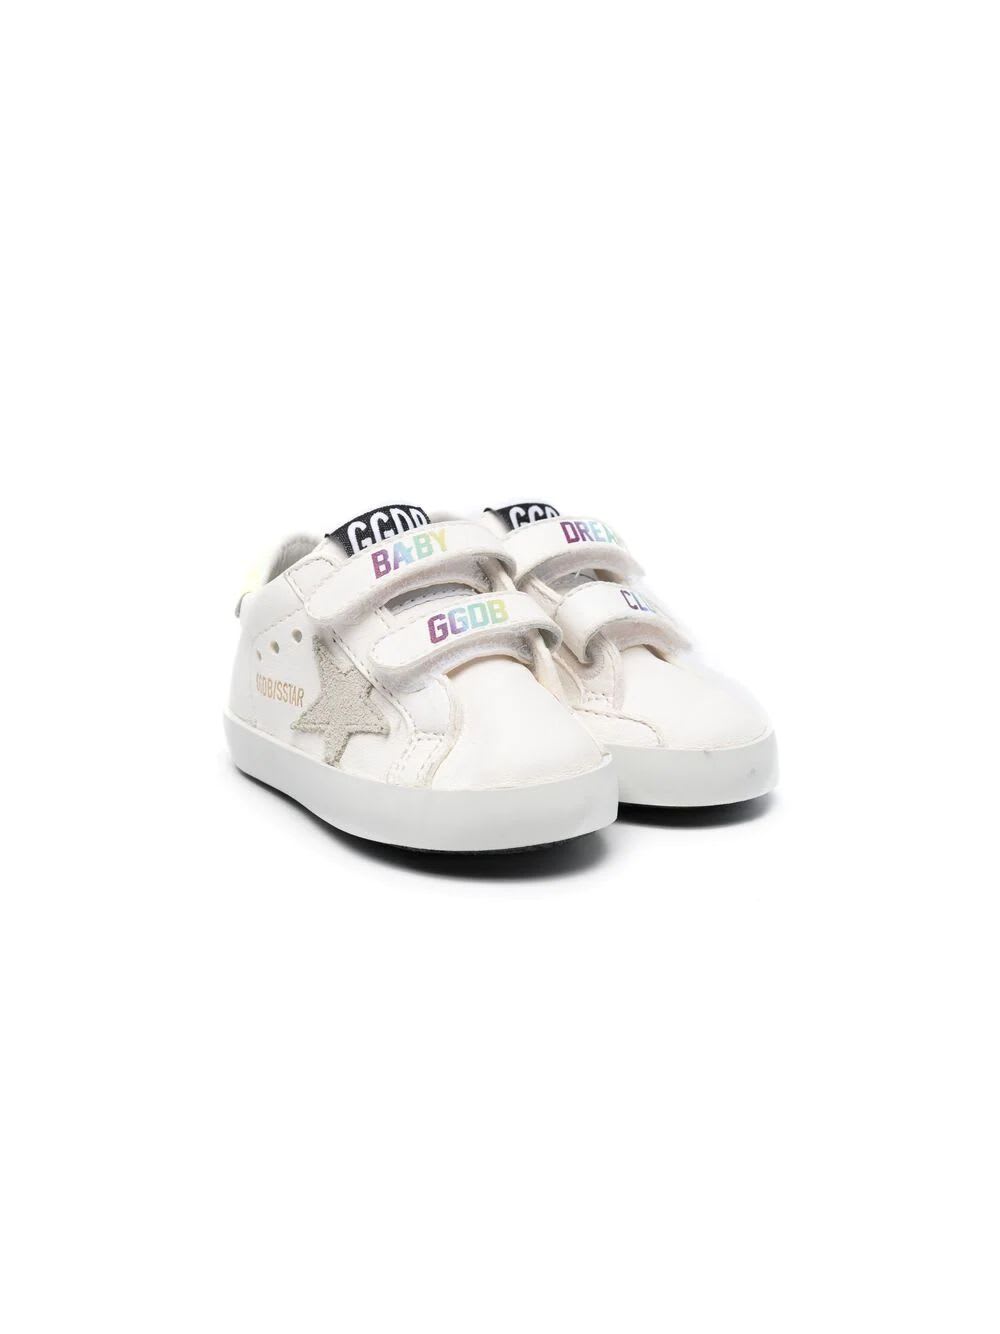 GOLDEN GOOSE NEWBORN WHITE SUPER-STAR SNEAKERS WITH MULTICOLOR BABY GGDB PRINT,GIF00166 F001192 80889